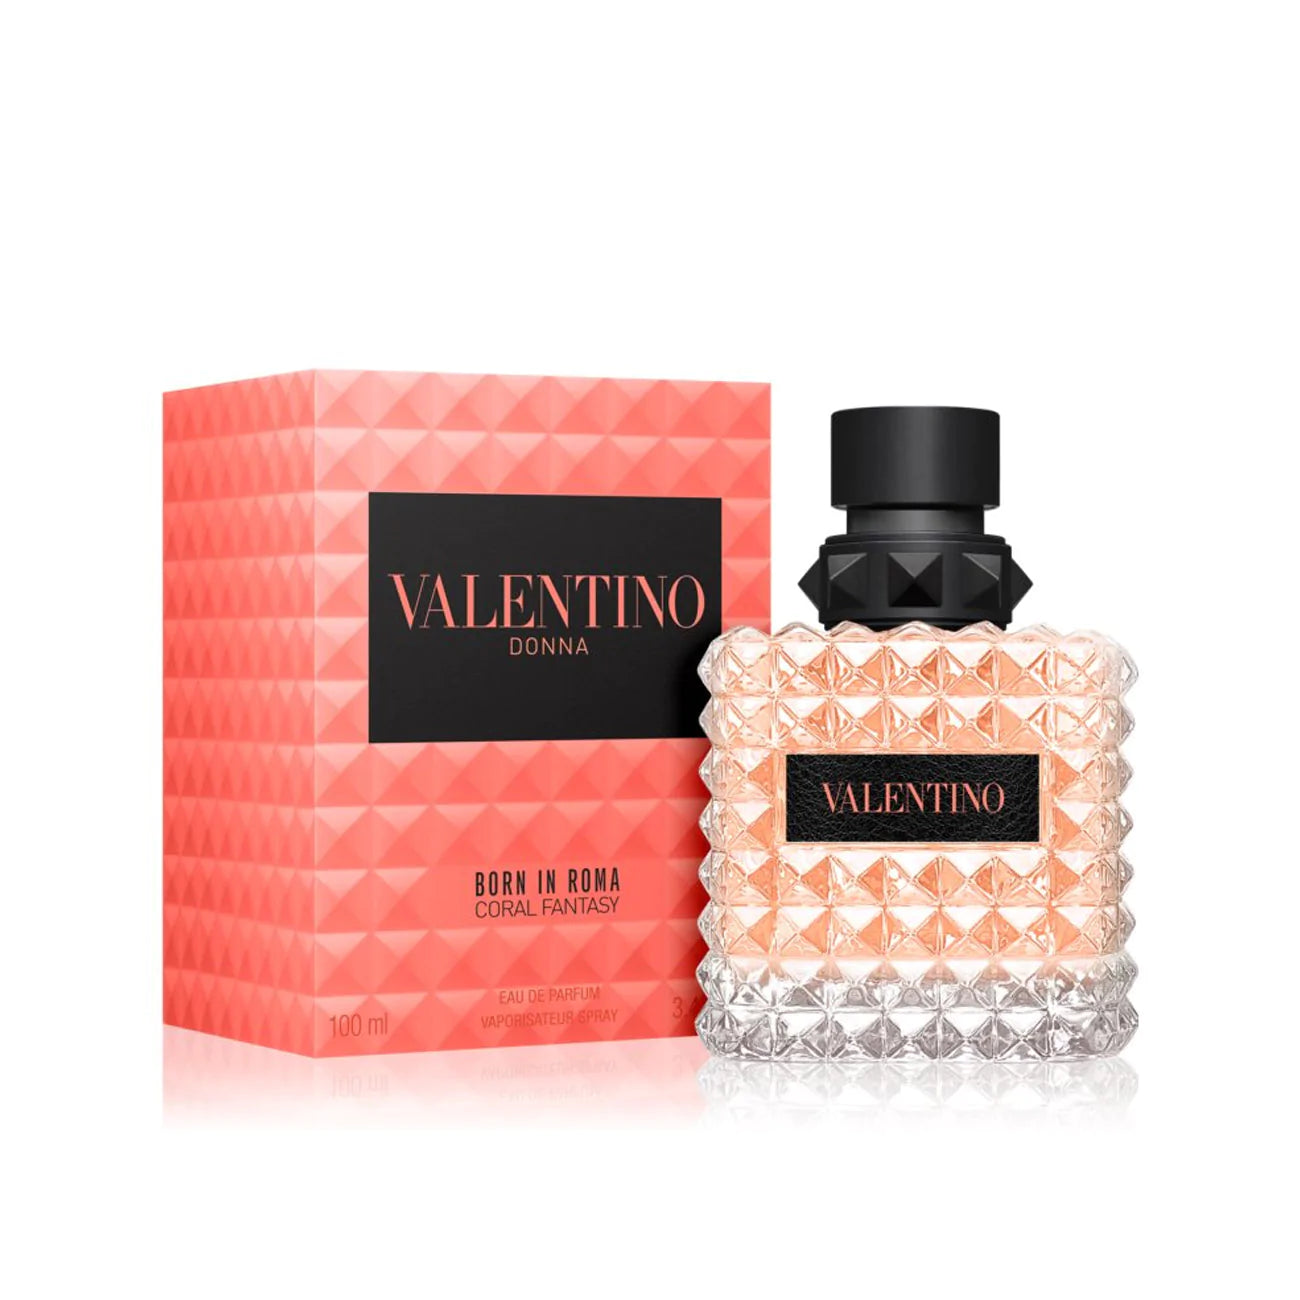 <p data-mce-fragment="1" data-auto="product-description" class="c-small-font c-margin-bottom-2v description" itemprop="description">A fruity, floral perfume that infuses a juicy Orange note with delicate Rose, fragrant Jasmine, and warm Ambrette seeds. This contemporary women's perfume is the perfect blend of fruity, feminine floral accords with sophisticated musky notes. Fragrance Family: Floral &amp; Fruity<br></p>
<ul data-mce-fragment="1" data-auto="product-description-bullets" class="c-small-font c-margin-bottom-7v bullets-section">
<li data-mce-fragment="1">Top Notes: Gold Kiwi, Bright Orange</li>
<li data-mce-fragment="1">Middle Notes: Fragrant Jasmine, Rose</li>
<li data-mce-fragment="1">Bottom Notes: Rich Ambrette, Warm Musk</li>
</ul>